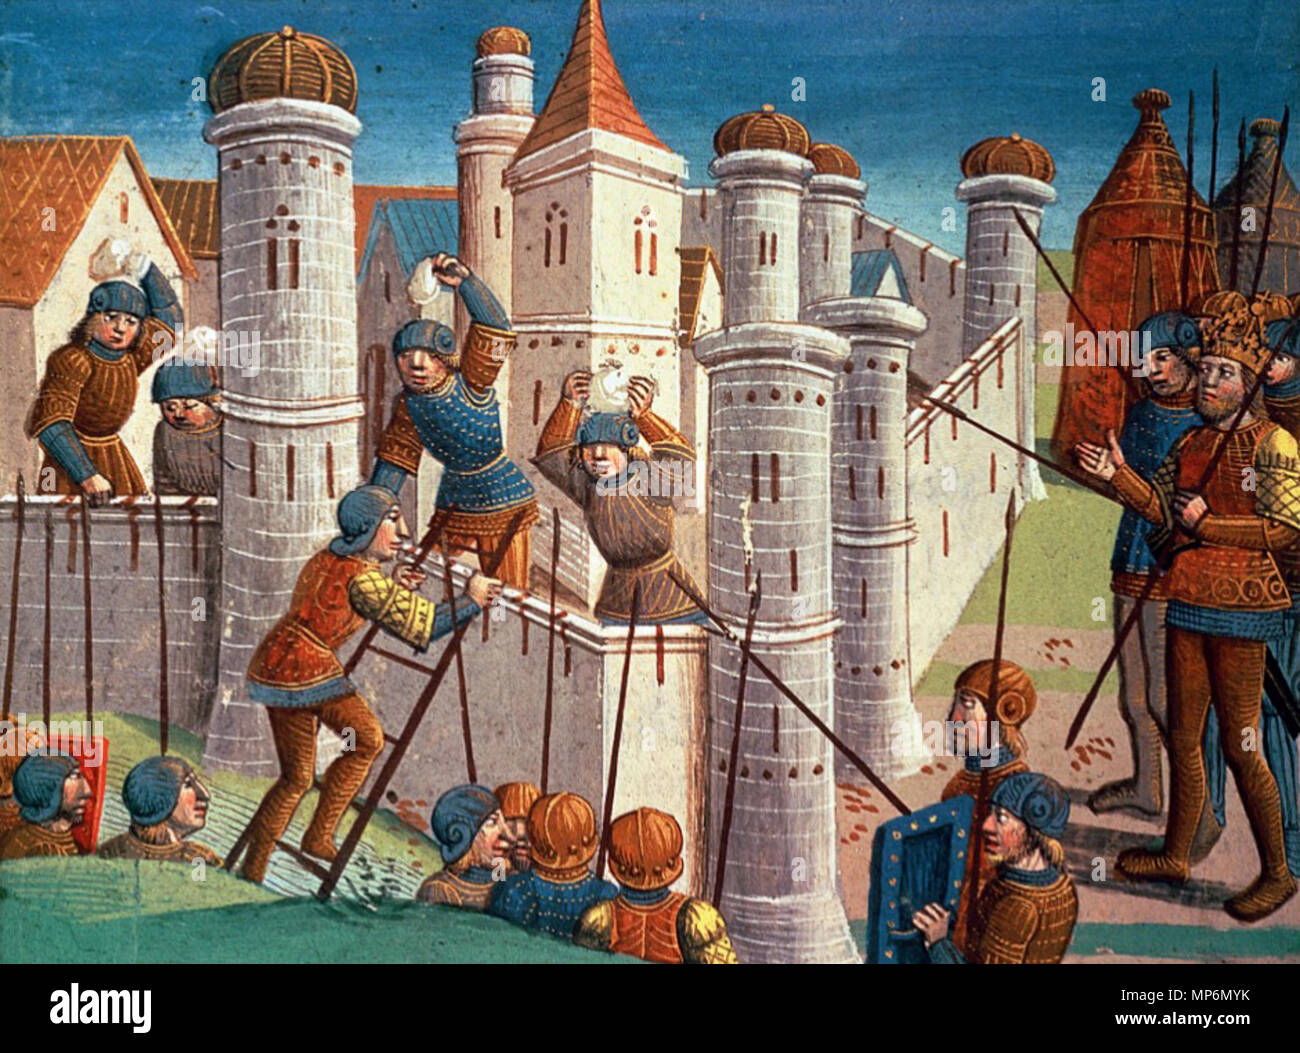 Siege of a city . Siege of a city. Painted miniature from a luxury copy of an incunable print of Ogier le Danois, ed. Antoine Vérard, Paris 1496–1499, held at Biblioteca Nazionale, Turin, XV-V-183, fol. diii v. Illustration of a fictional reconquest of Rome from Saracen occupiers by Charlemagne ('Comment le roy charlemaigne fist armer son ost pour aller assaillir romme et comment ... la ville fut prinse...'). 1496.   1119 Siege of a city, medieval miniature Stock Photo